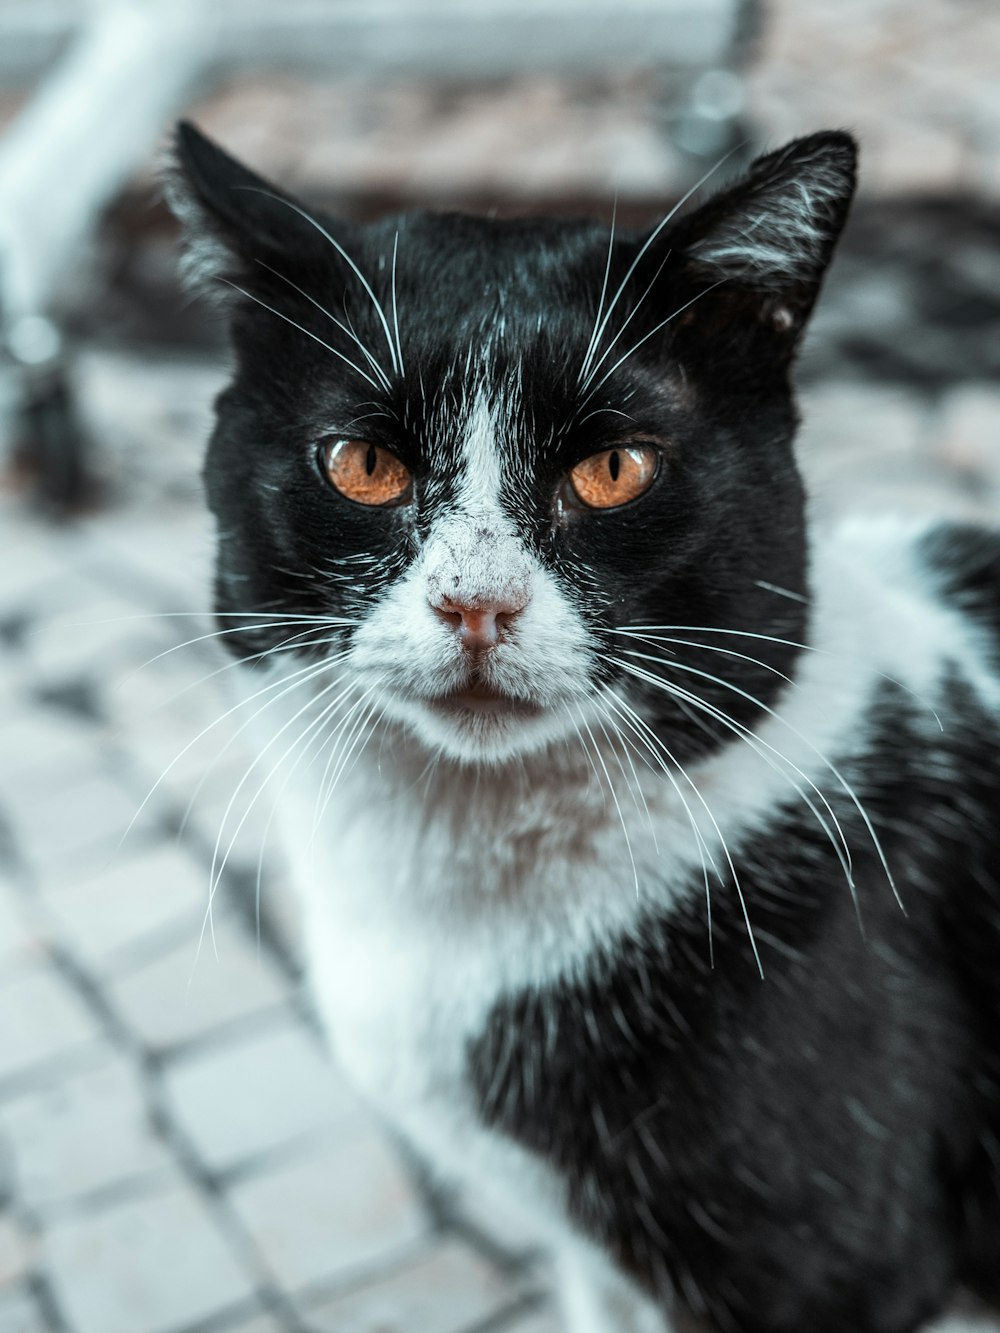 a black and white cat sitting on top of a brick floor